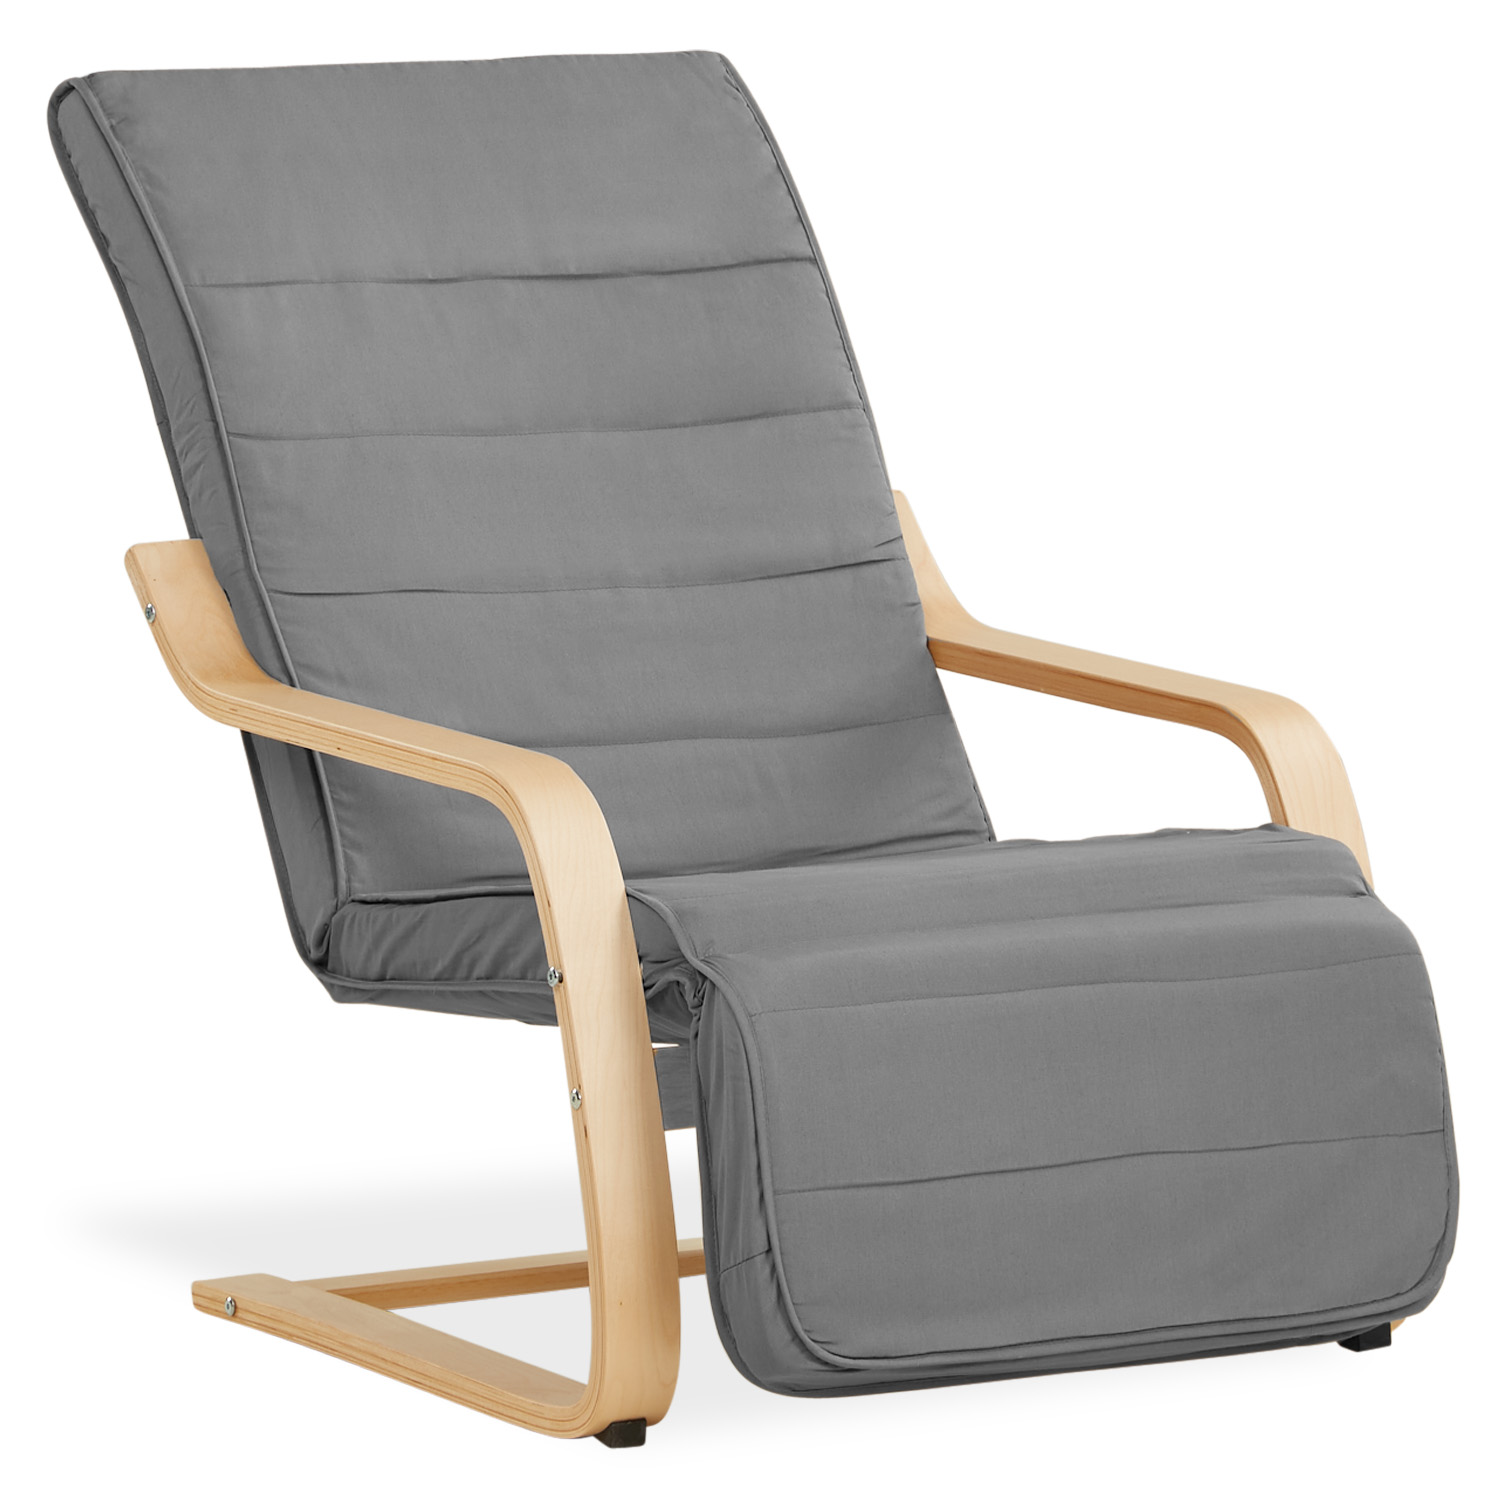 Recliner chair with footrest Grey Nursing chair Chaise lounge Eames chair Armchair